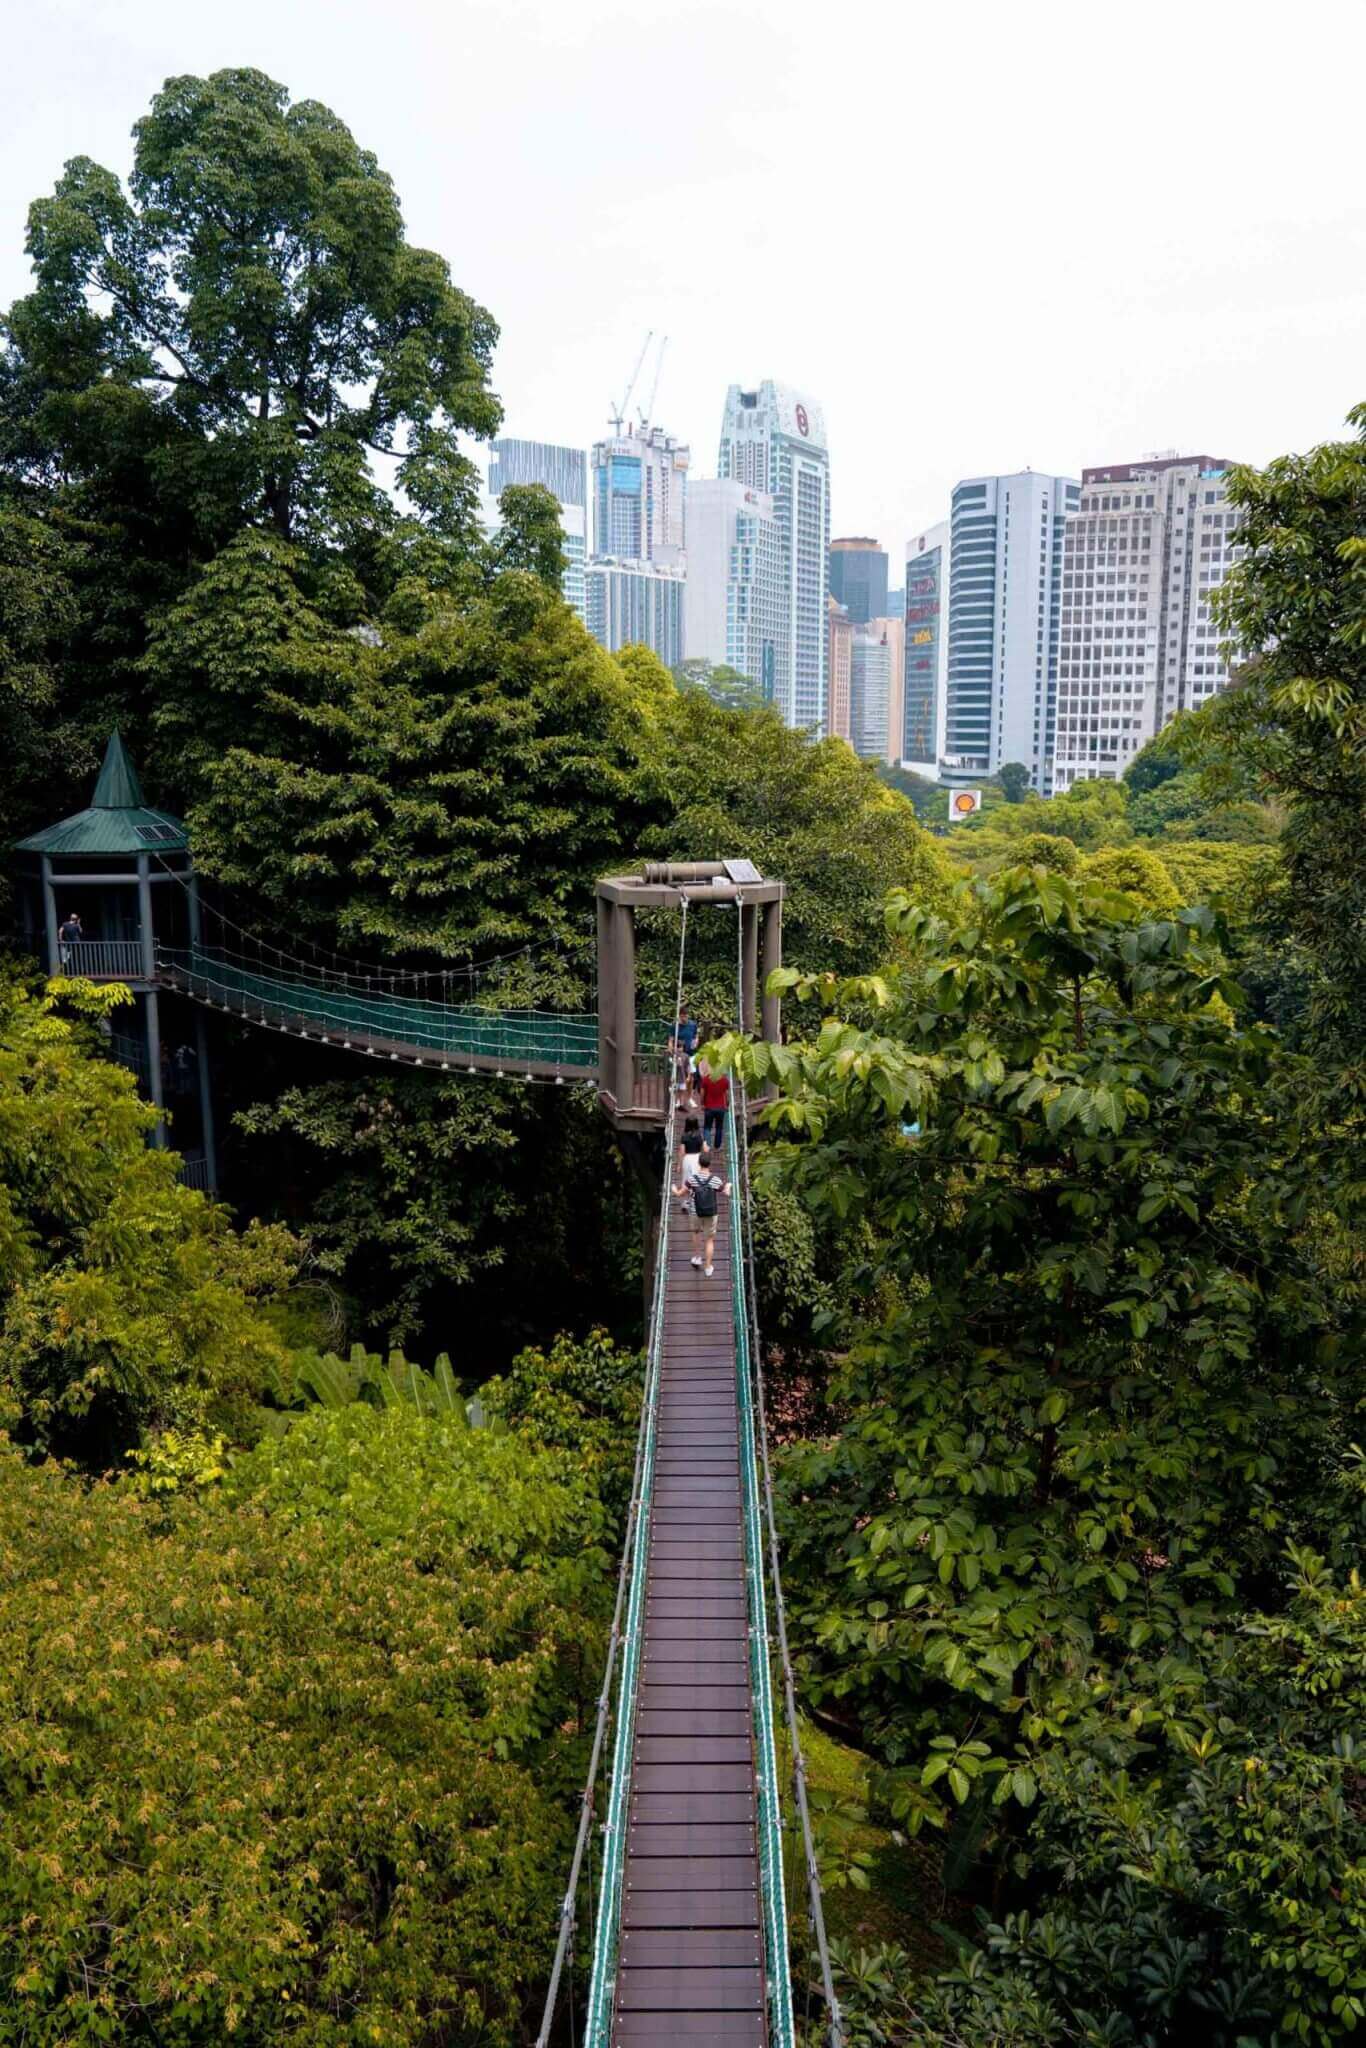 48 hours in Kuala Lumpur: The best things to do, see and eat